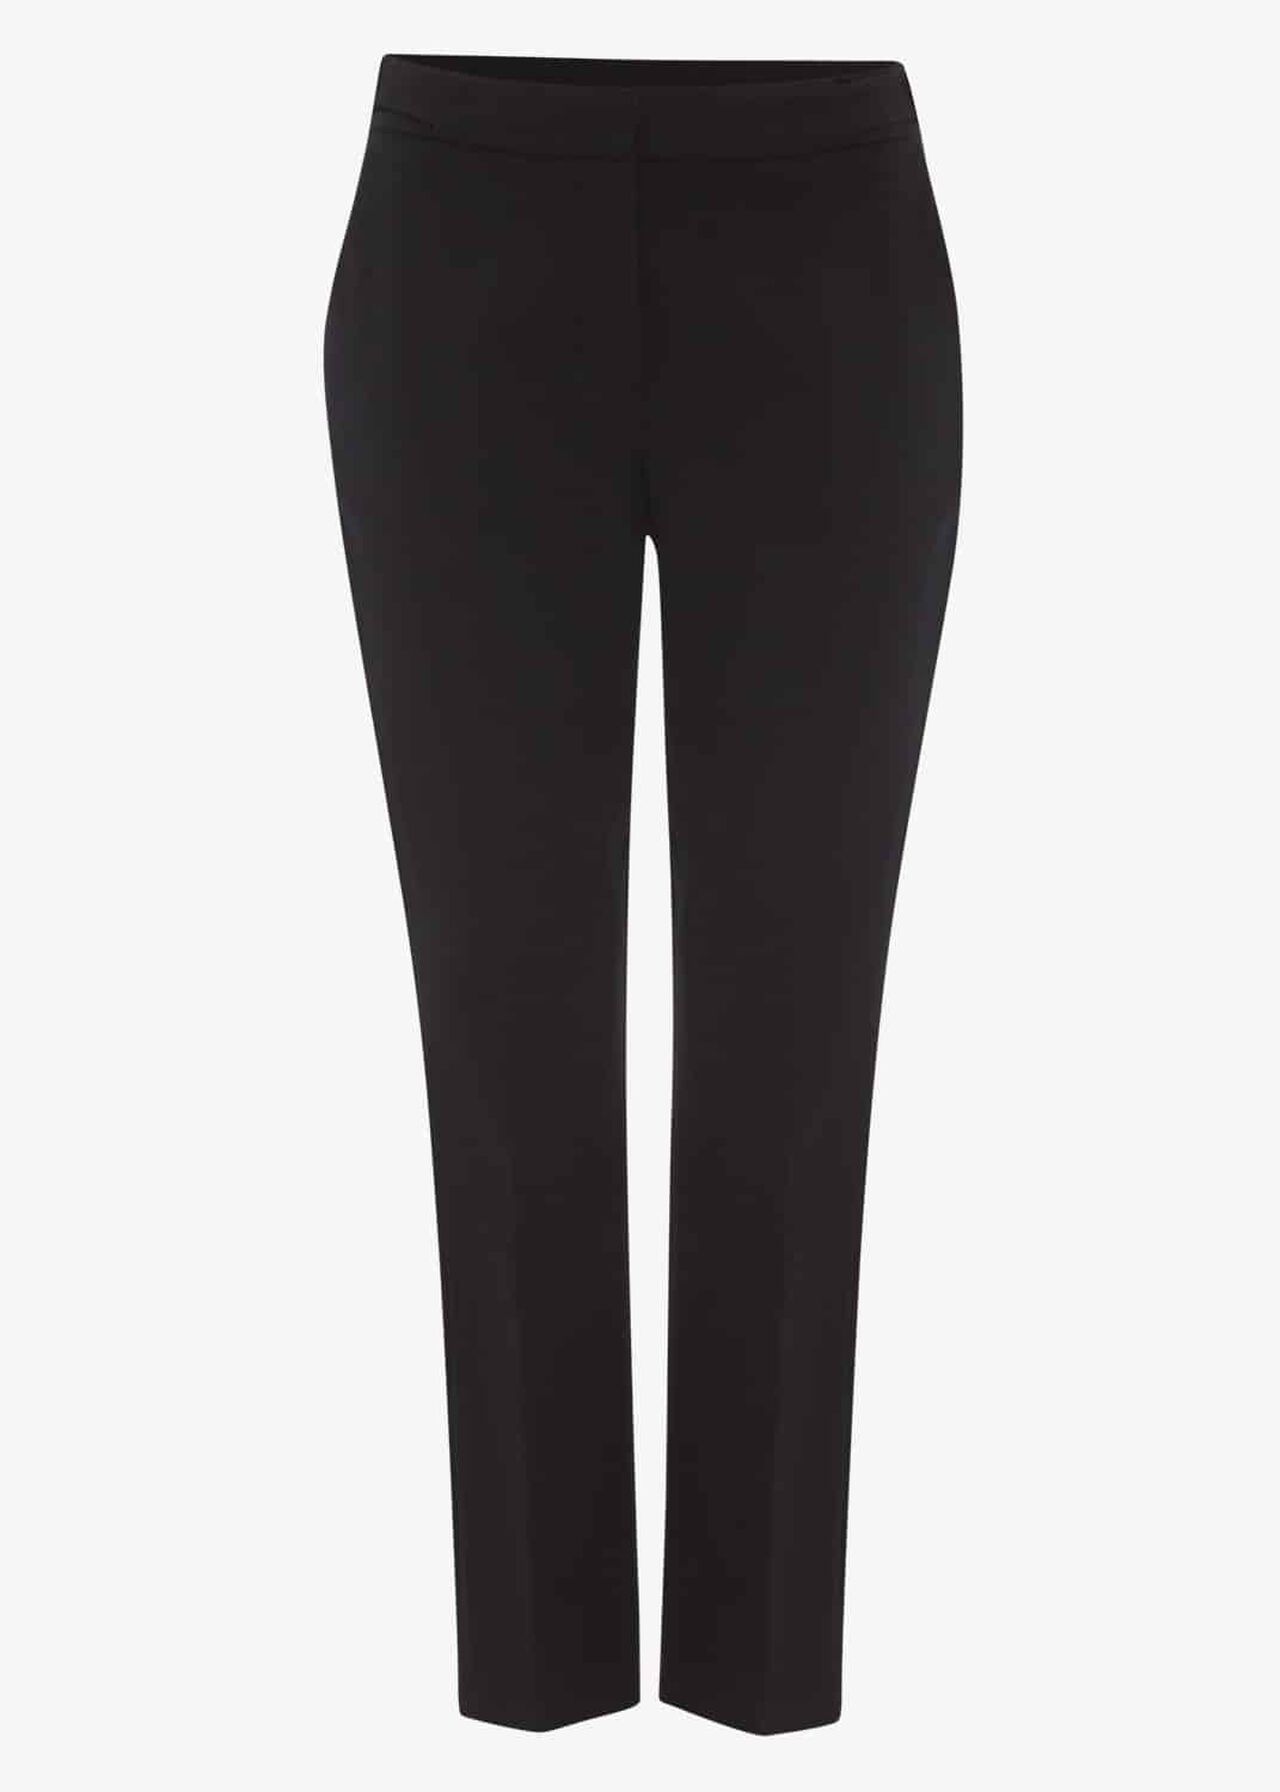 Lucy-Lou Buckle Trousers